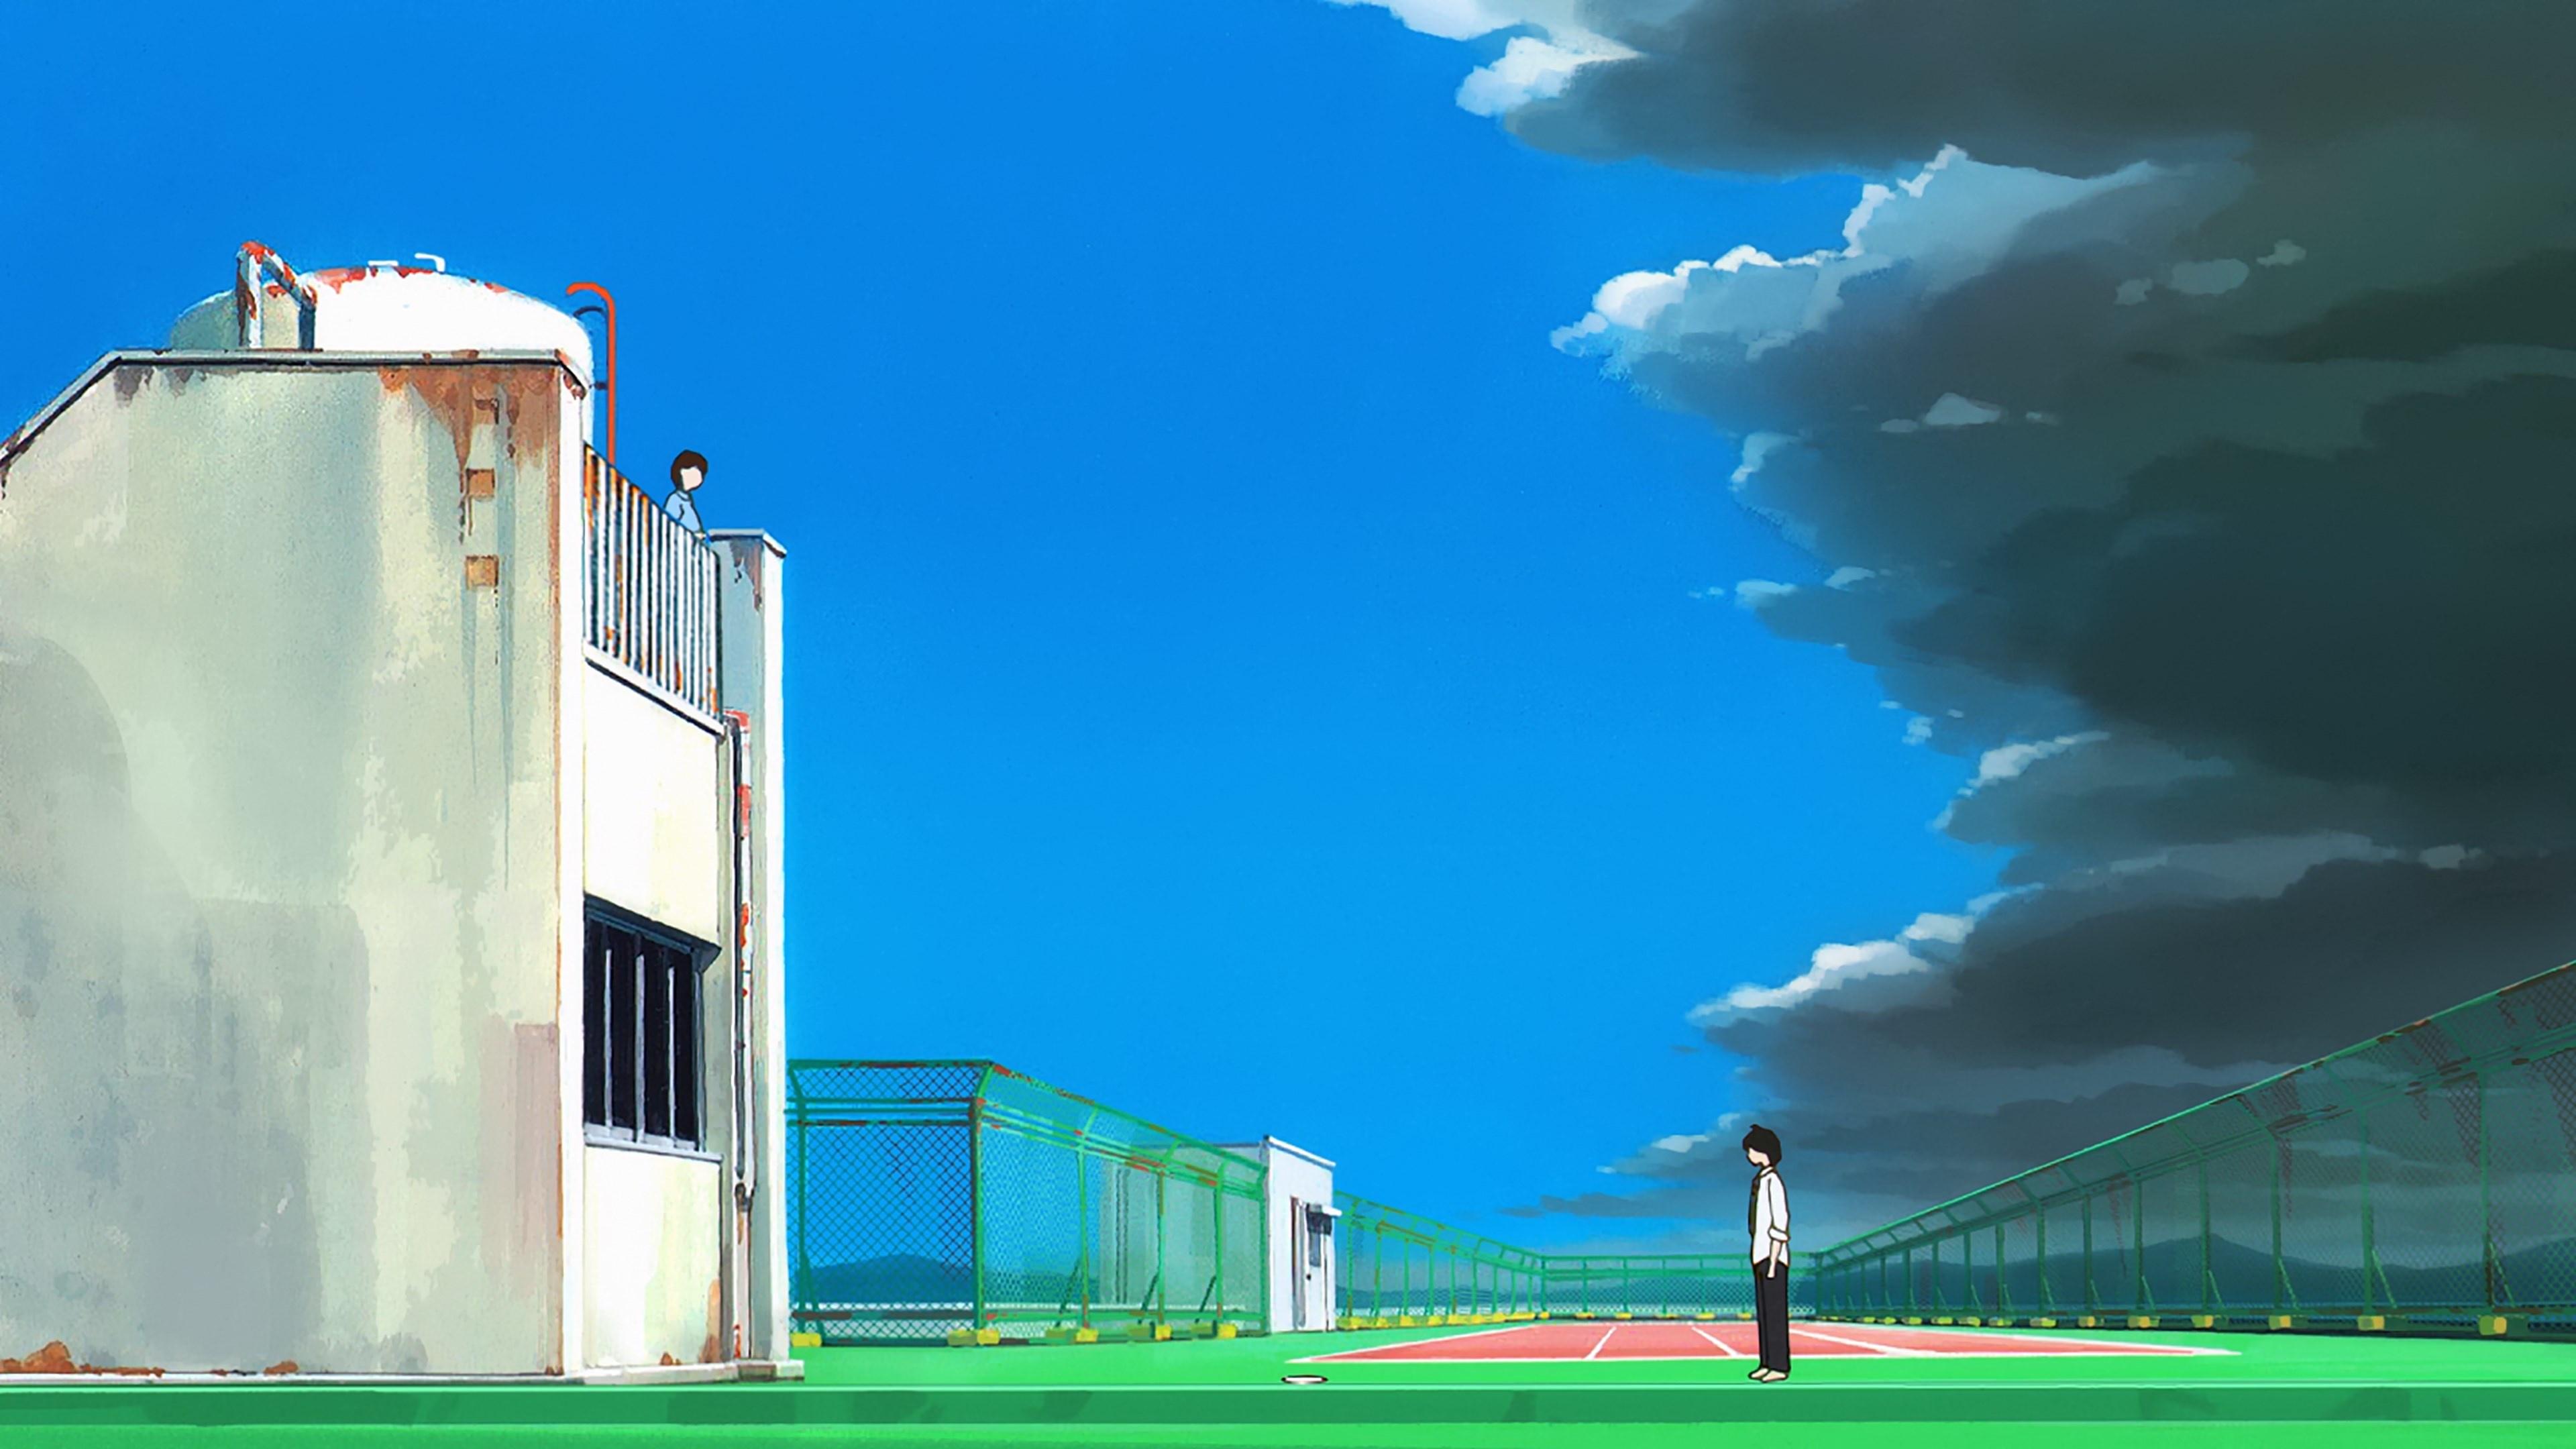 Guitar, Loneliness, and Blue Planet: A deeper look into Bocchi the Rock's  protagonist., by bike